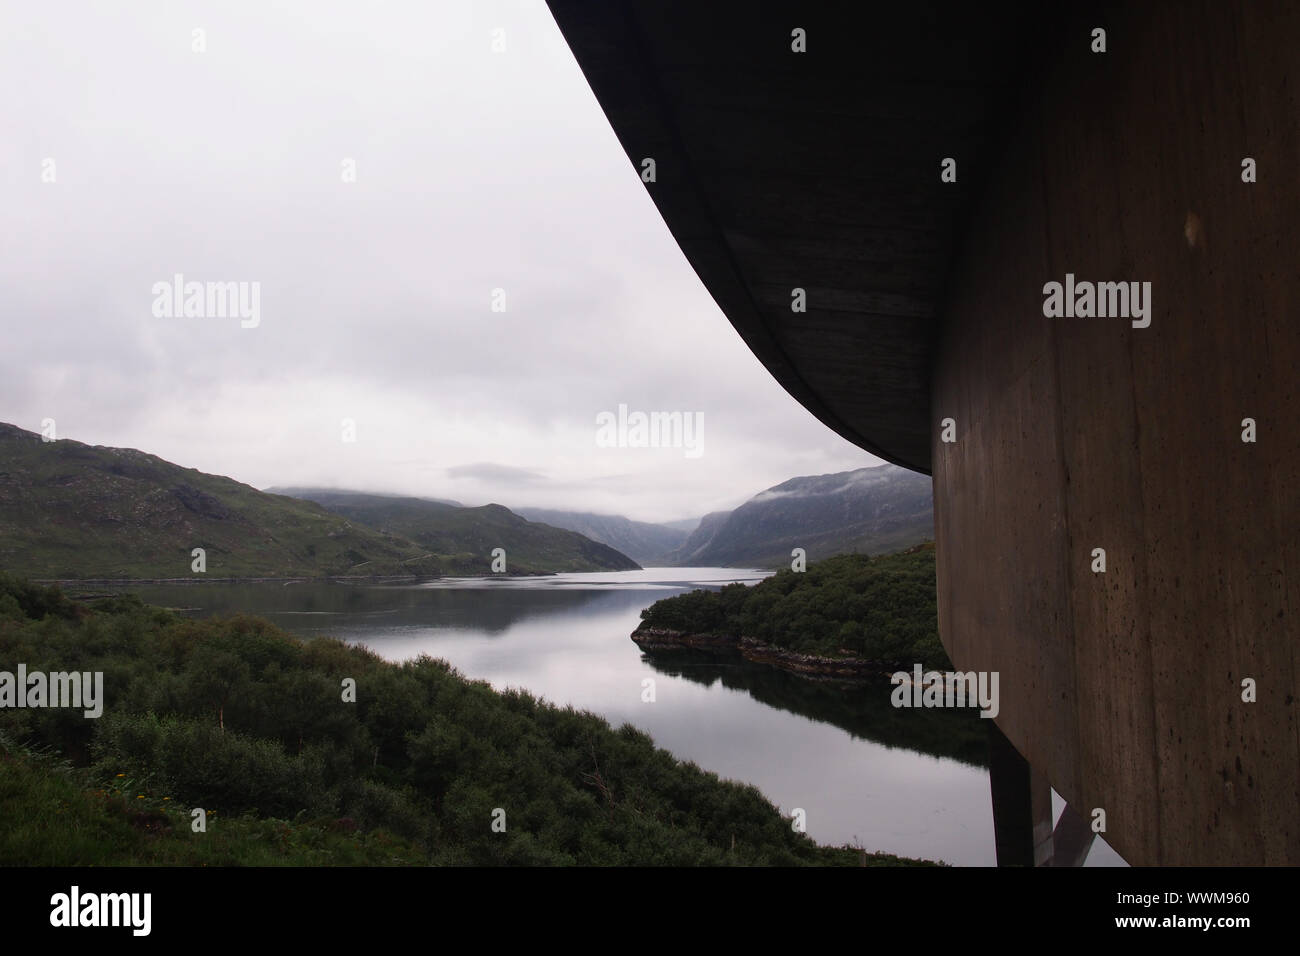 A view from underneath the Kylesku Bridge, Sutherland, Scotland, looking up Loch Gleann Dubh showing the curve of the bridge Stock Photo